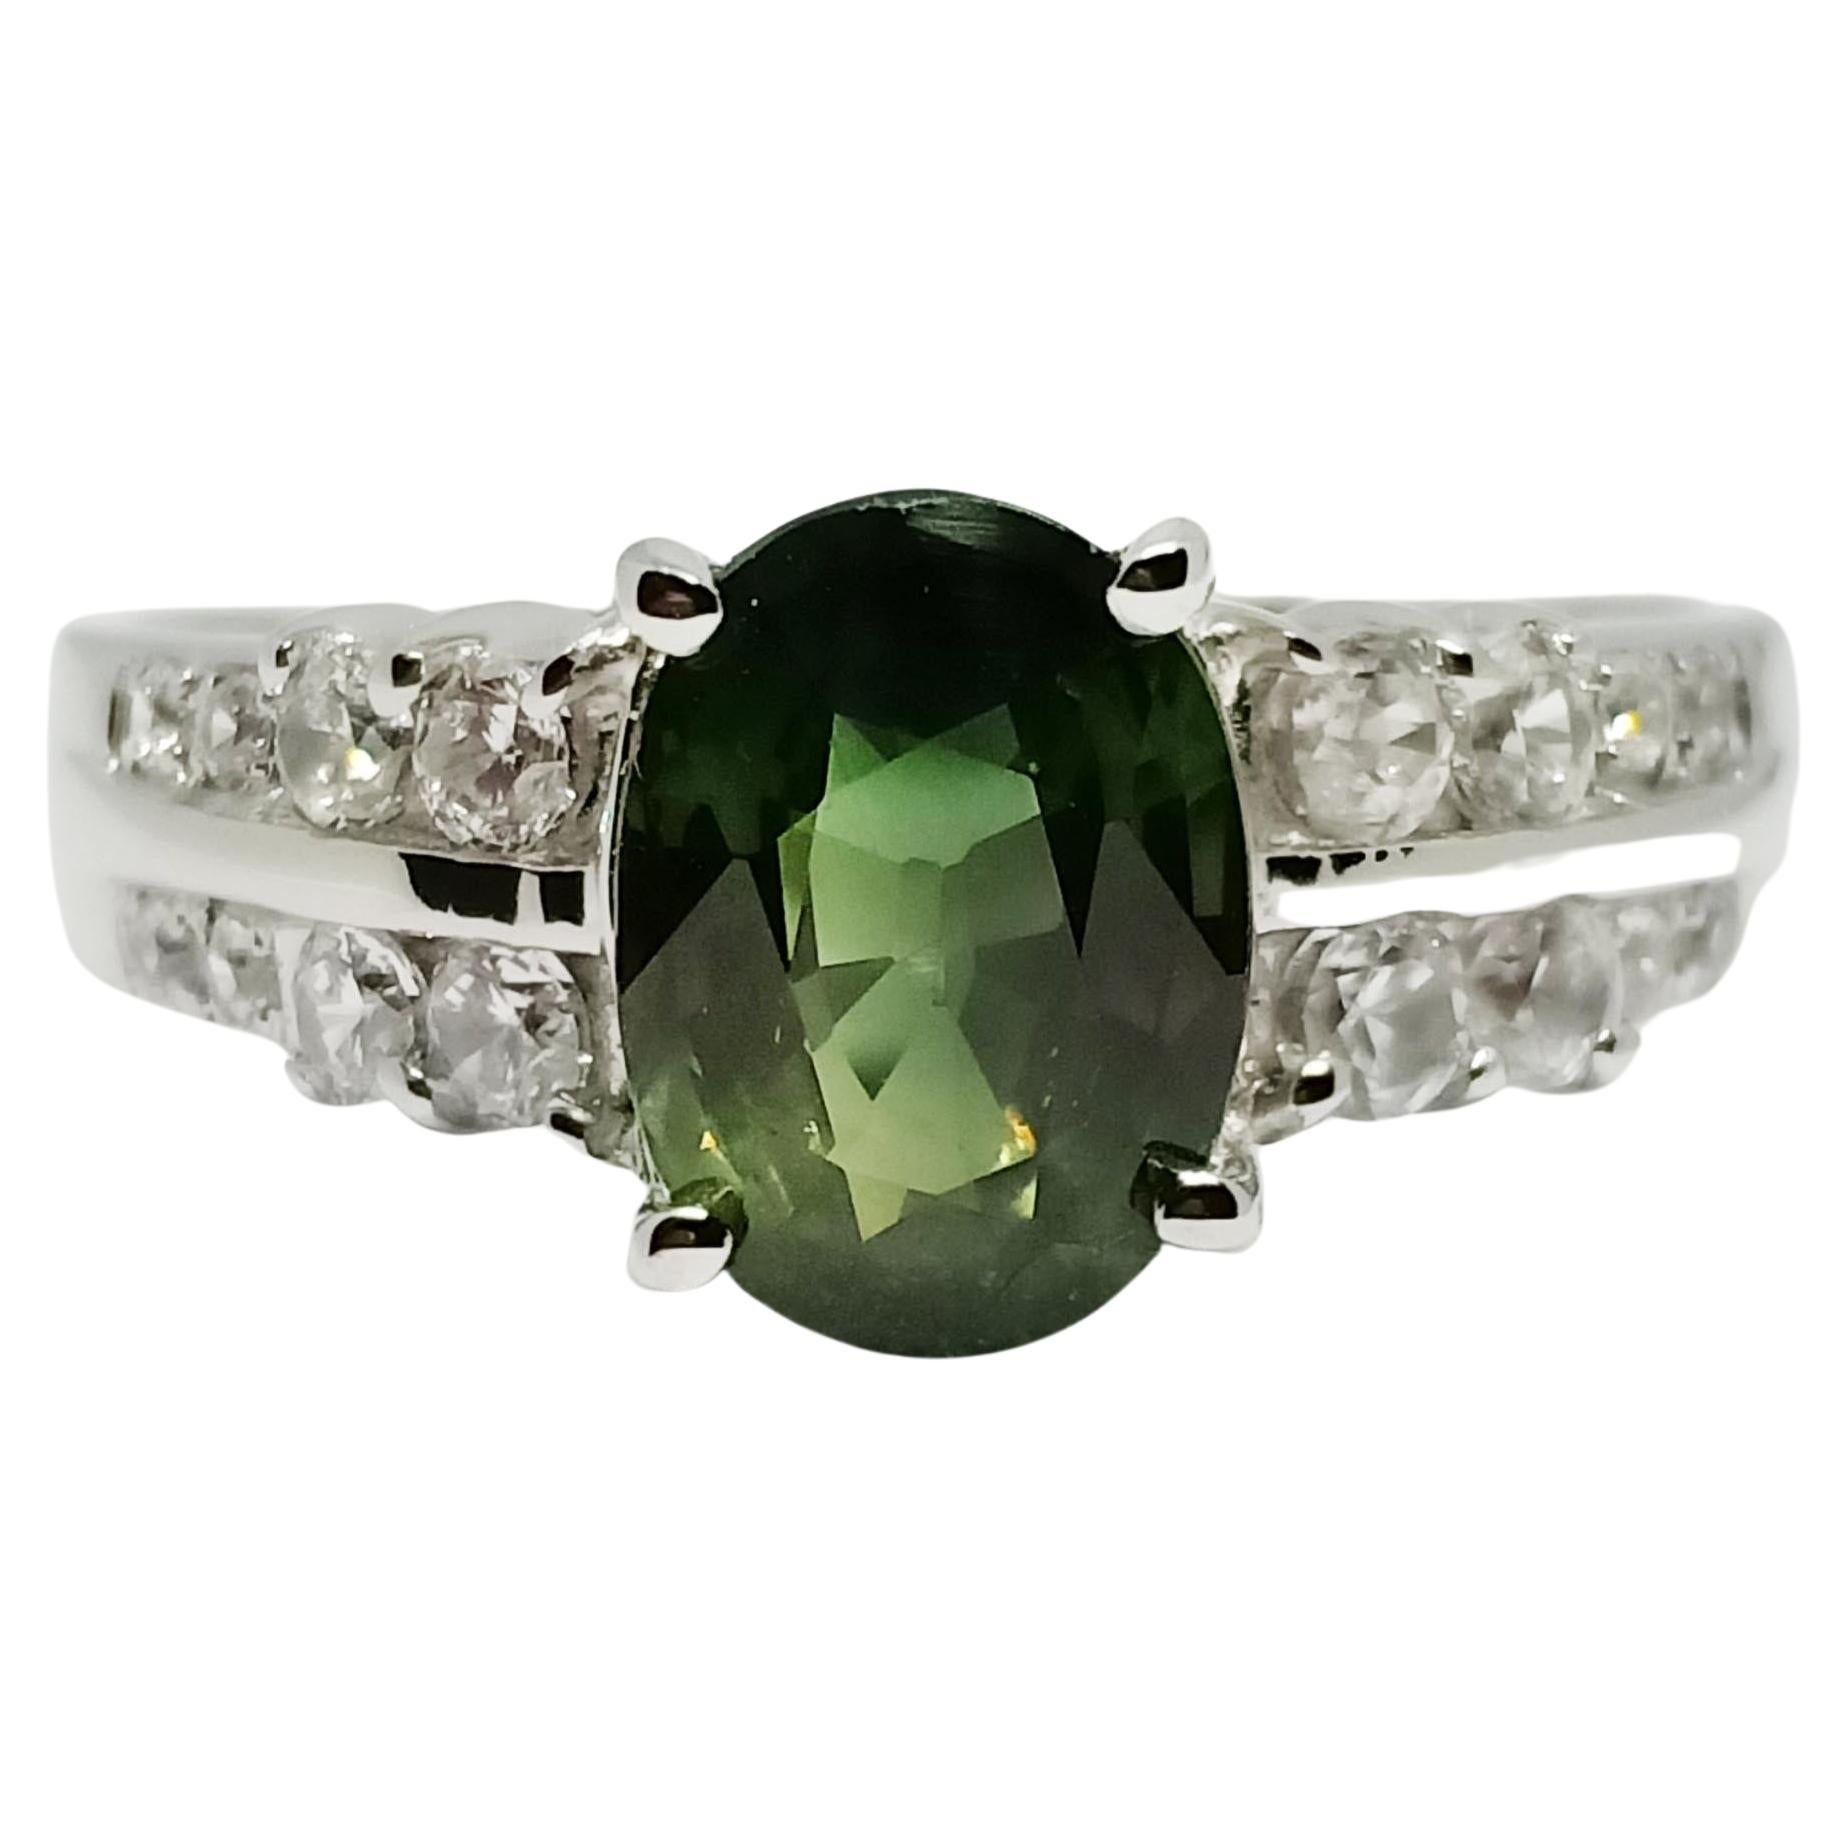 Green sapphire Only Heated 1.65cts 18WG plated over sterling silver